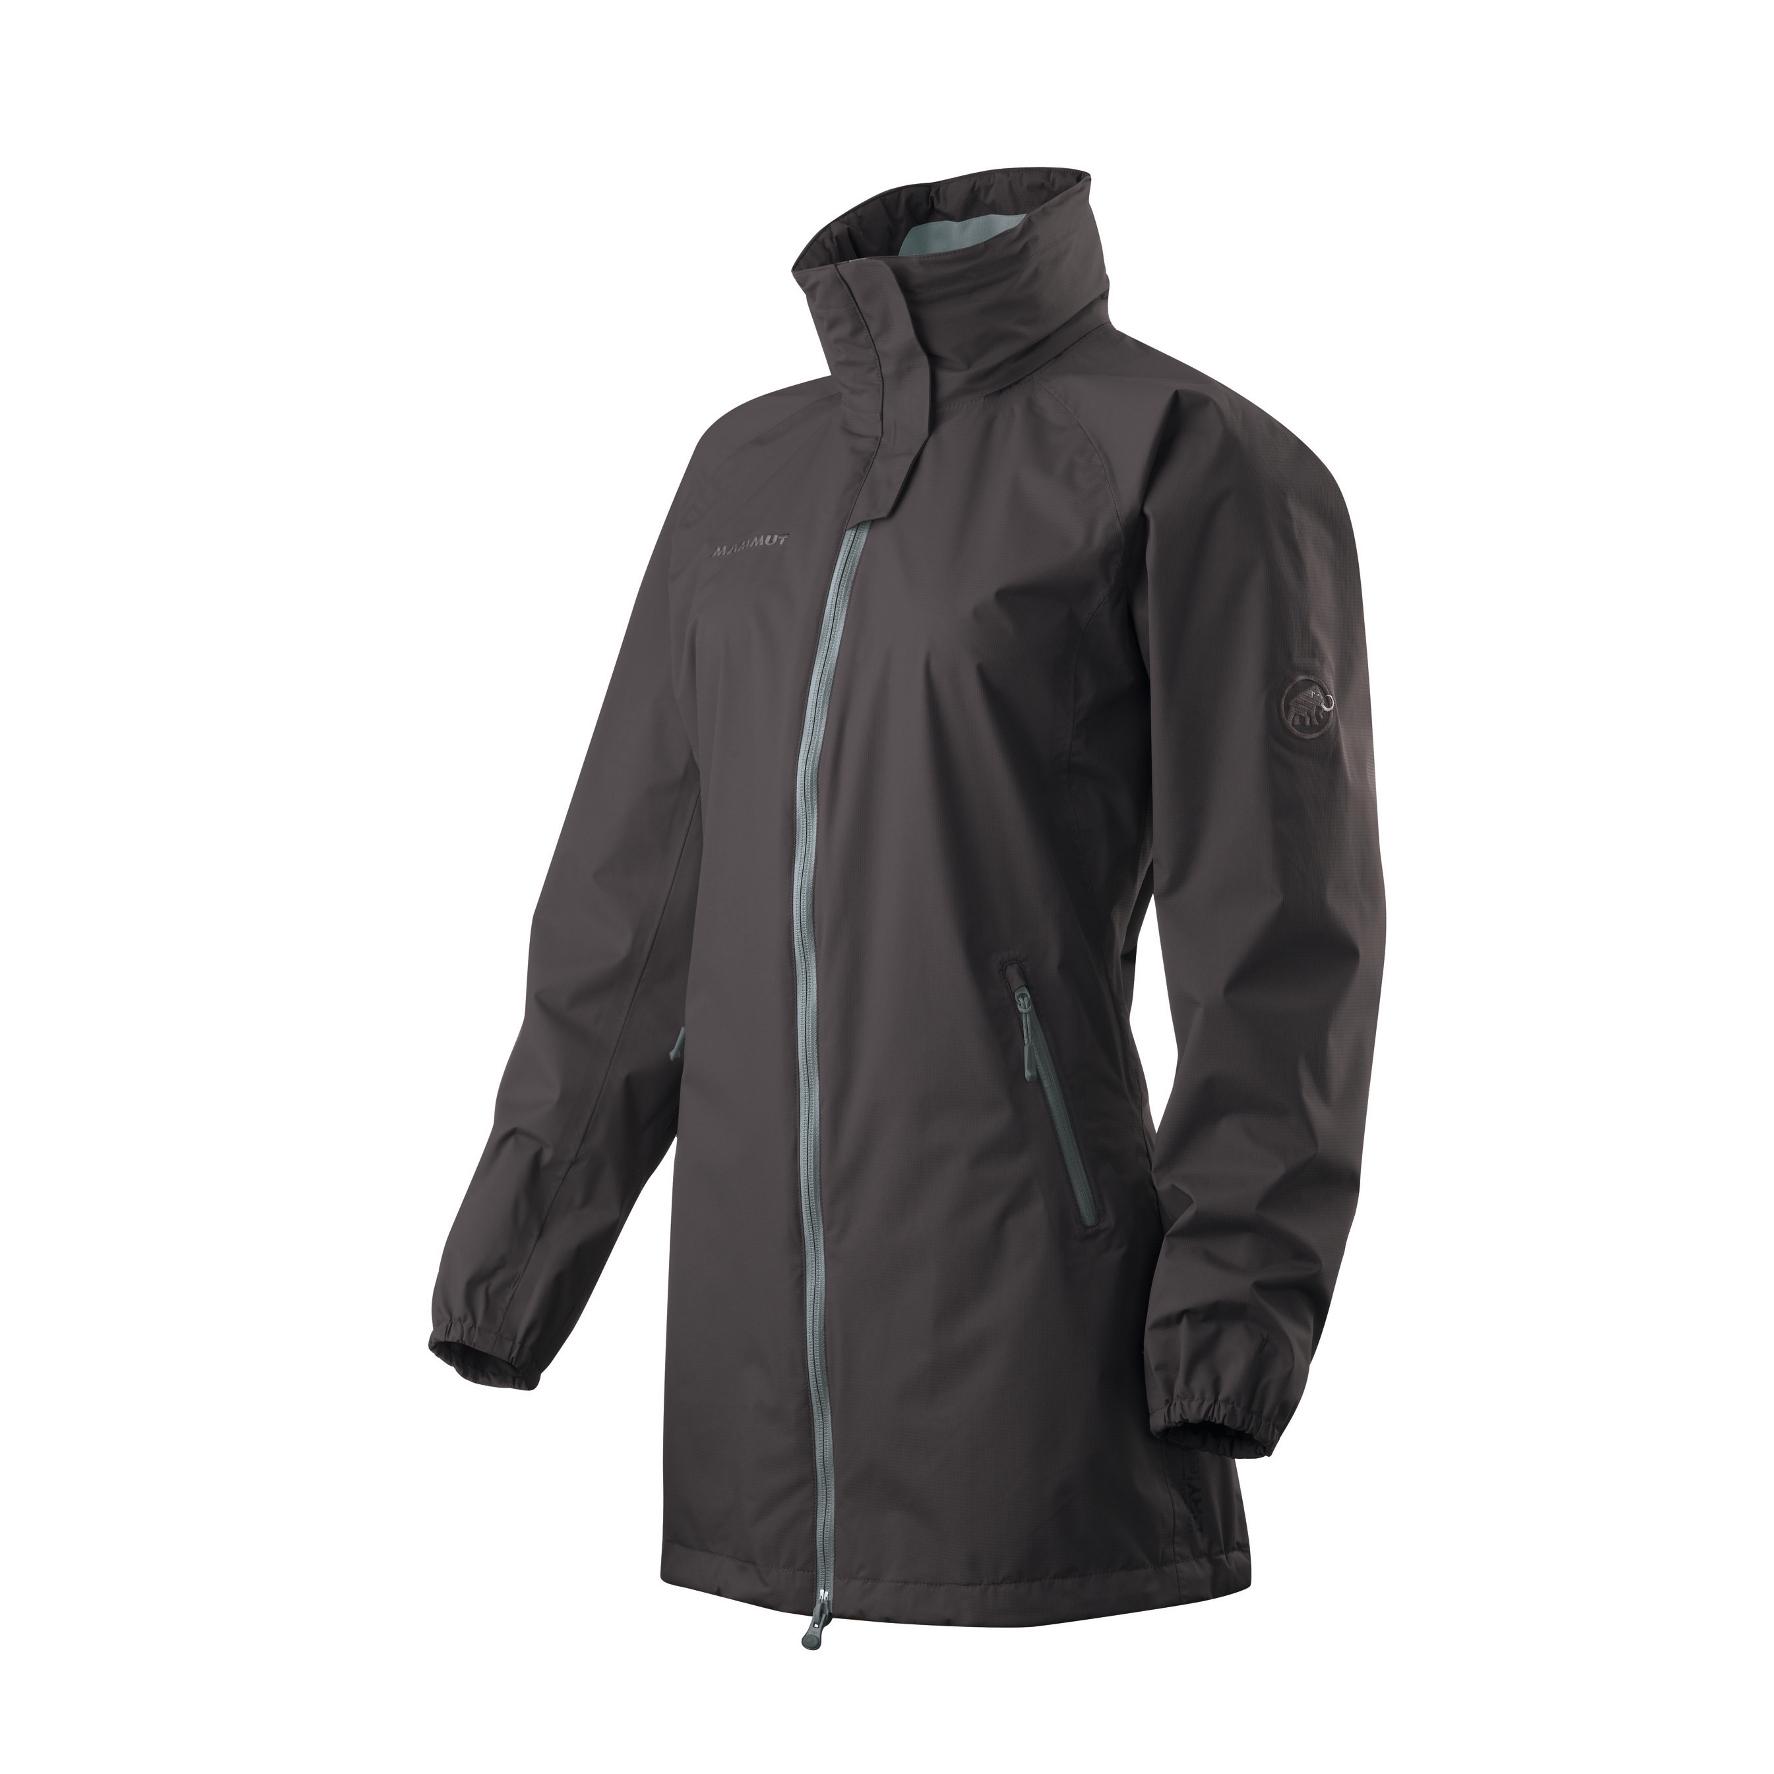 Foto Chaqueta impermeable Mammut Youko gris para mujer , l